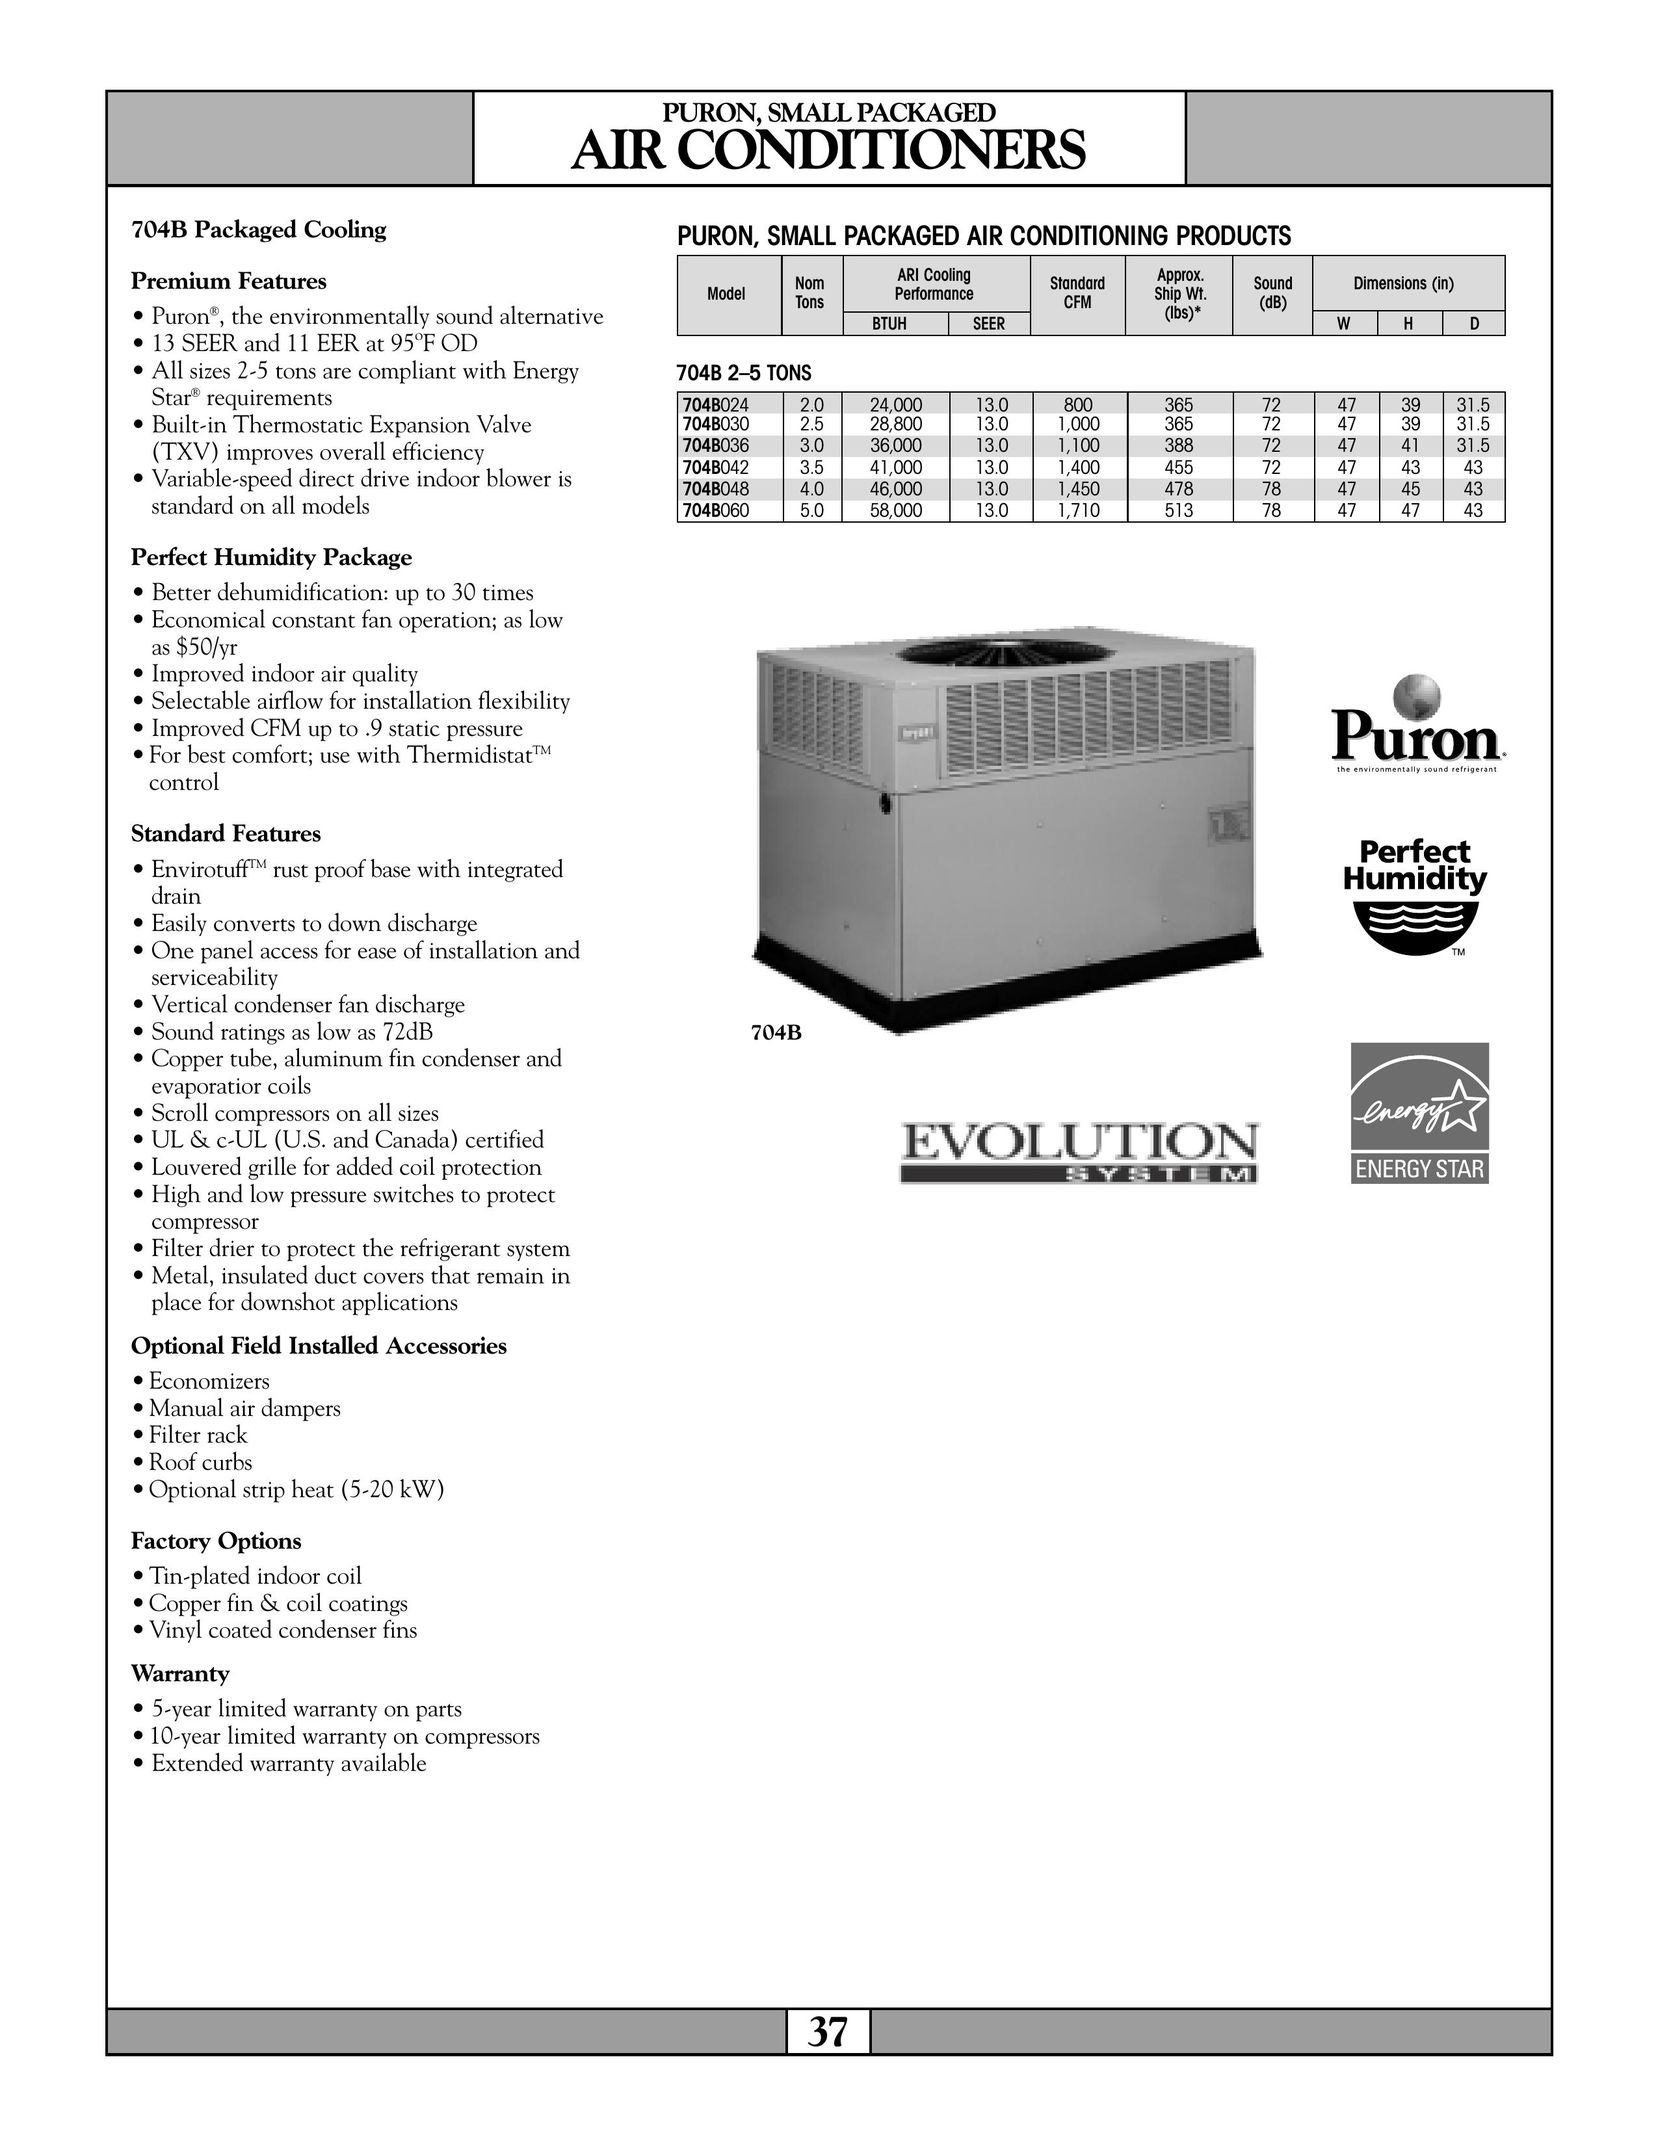 Revolutionary Cooling Systems 704B048 Air Conditioner User Manual